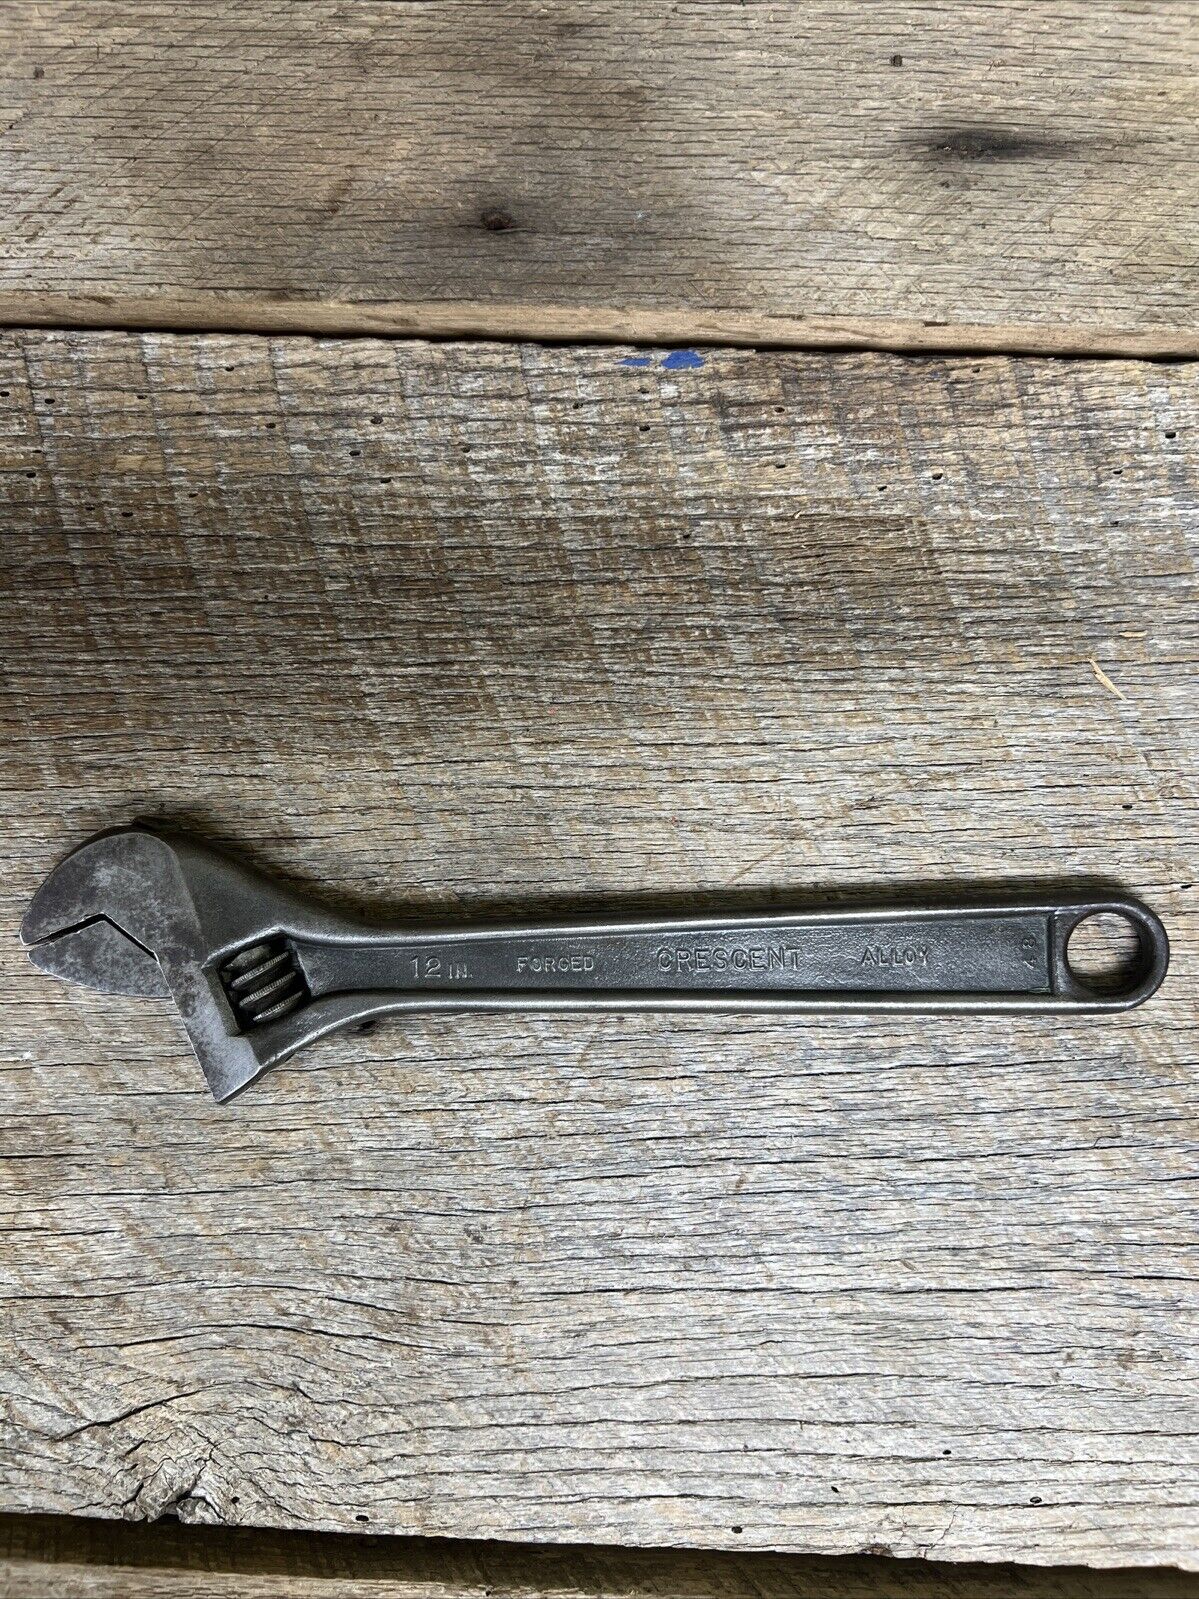 Vintage Crescent 12 Inch Adjustable Wrench Crescent Tool Co. Jamestown,NY USA